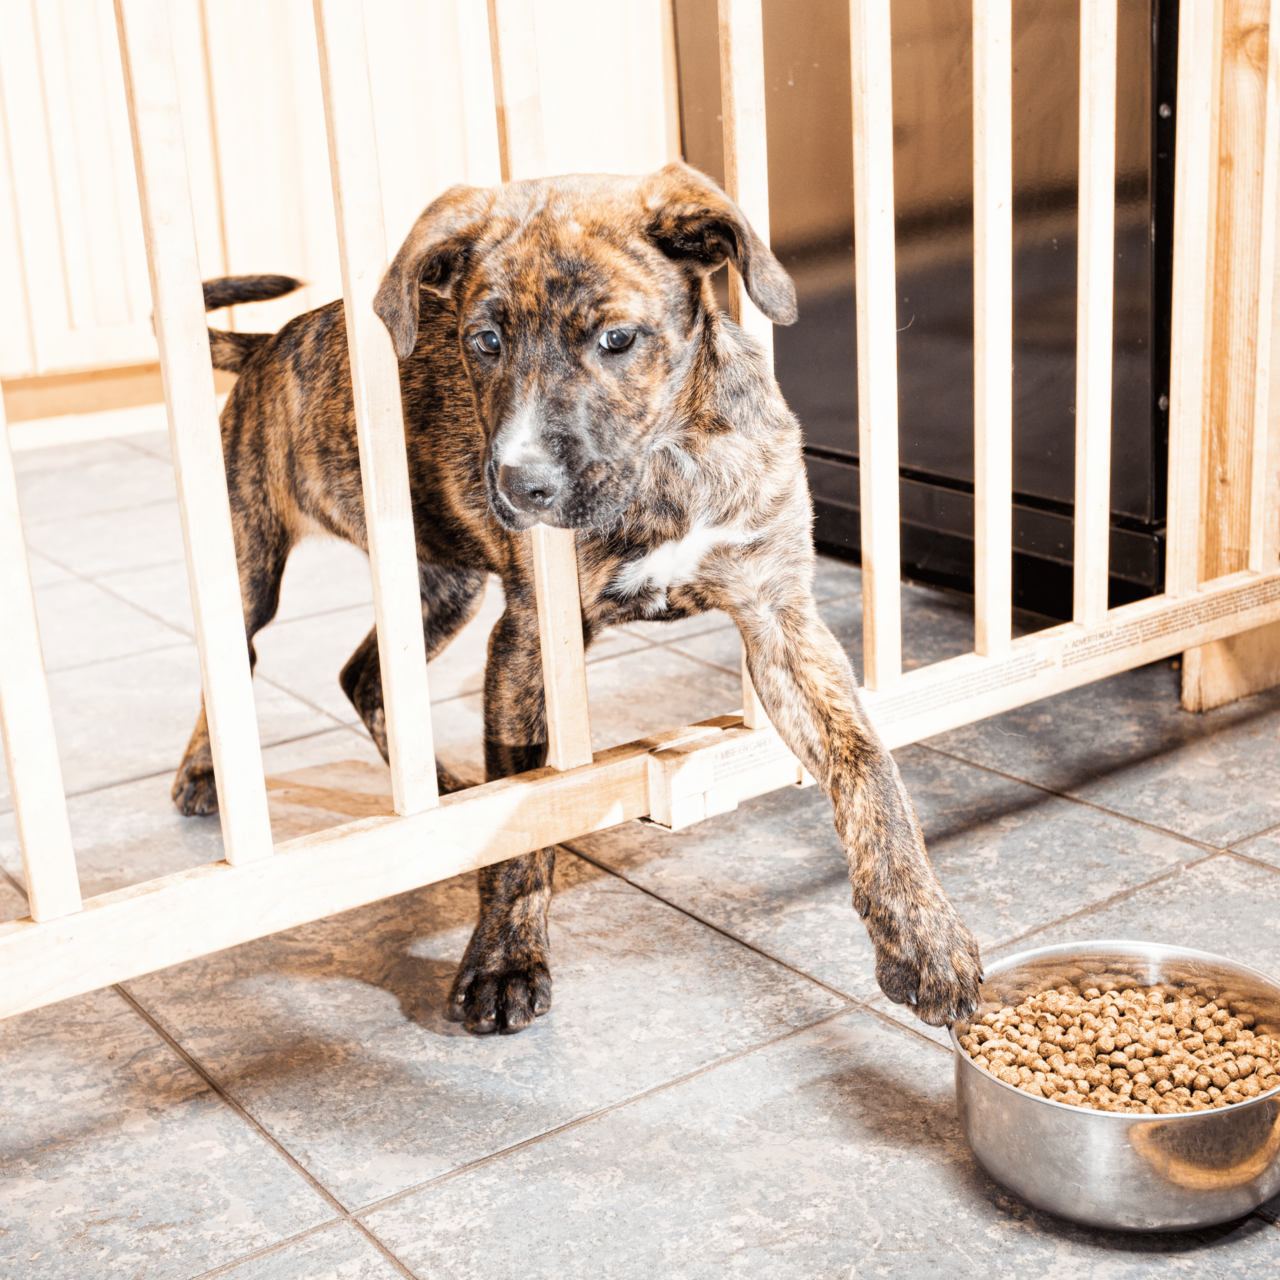 Dog reaching through stairgate to get to dry bowl of dog food